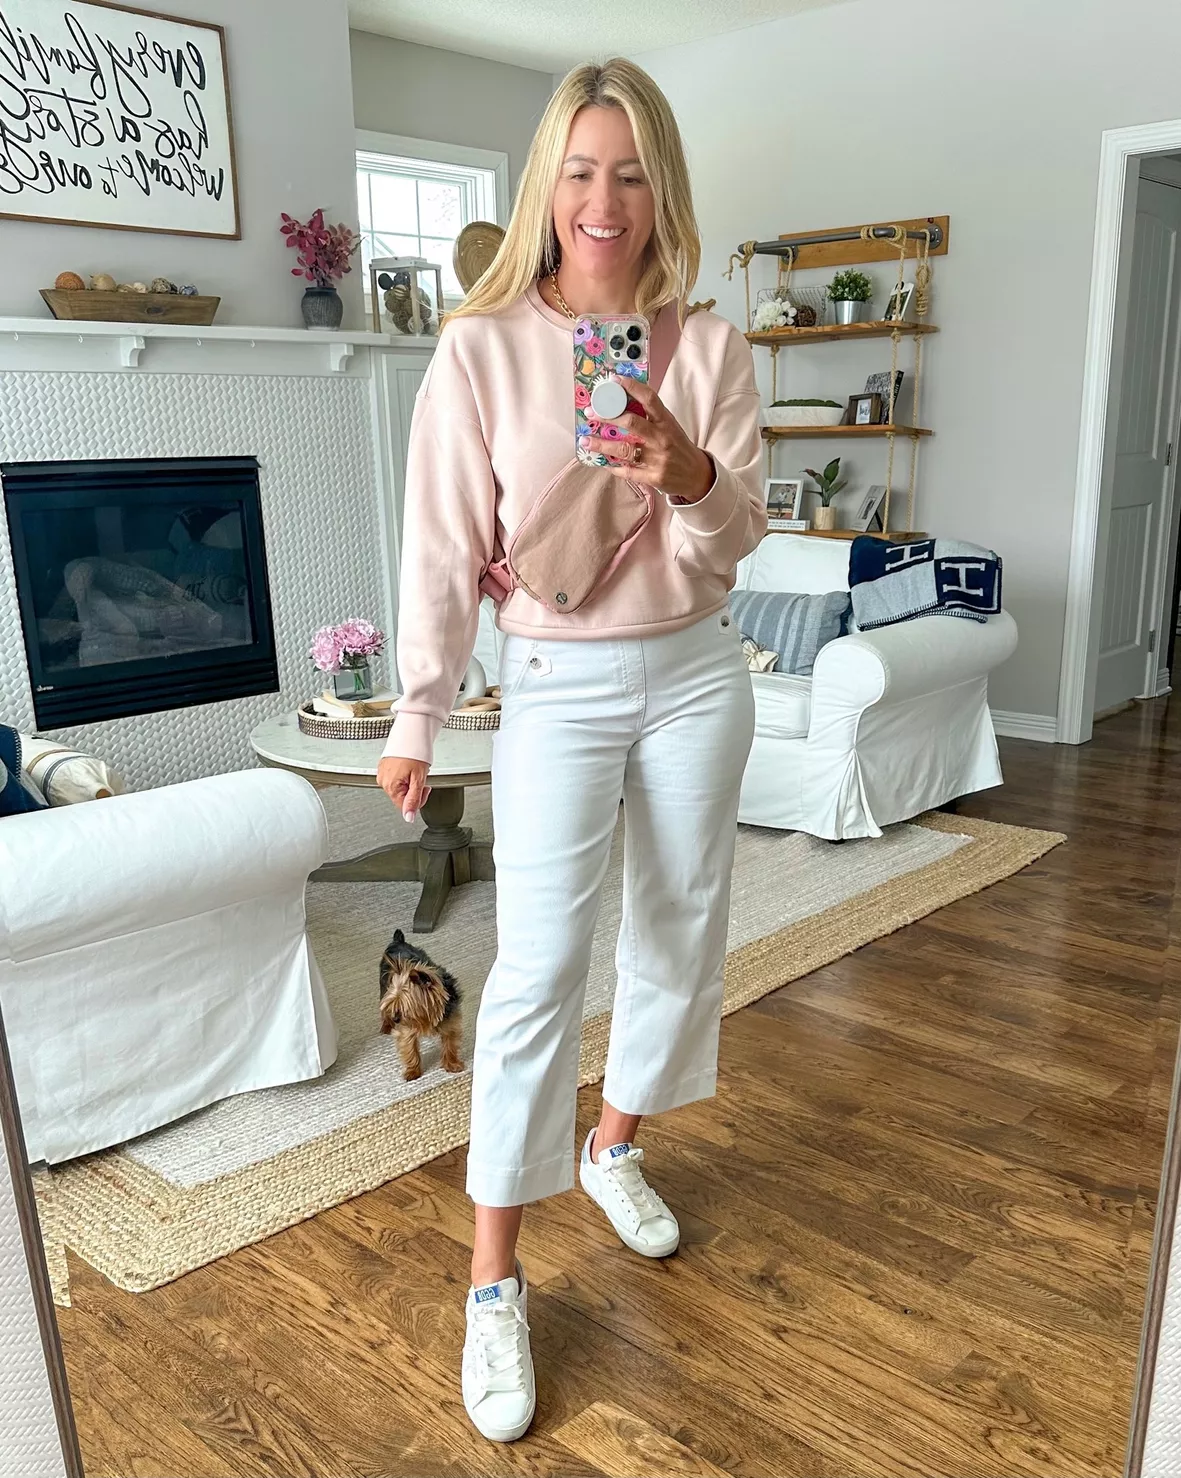 Spanx Twill Pants: 4 Outfit Ideas for Spring - Fashionably Late Mom